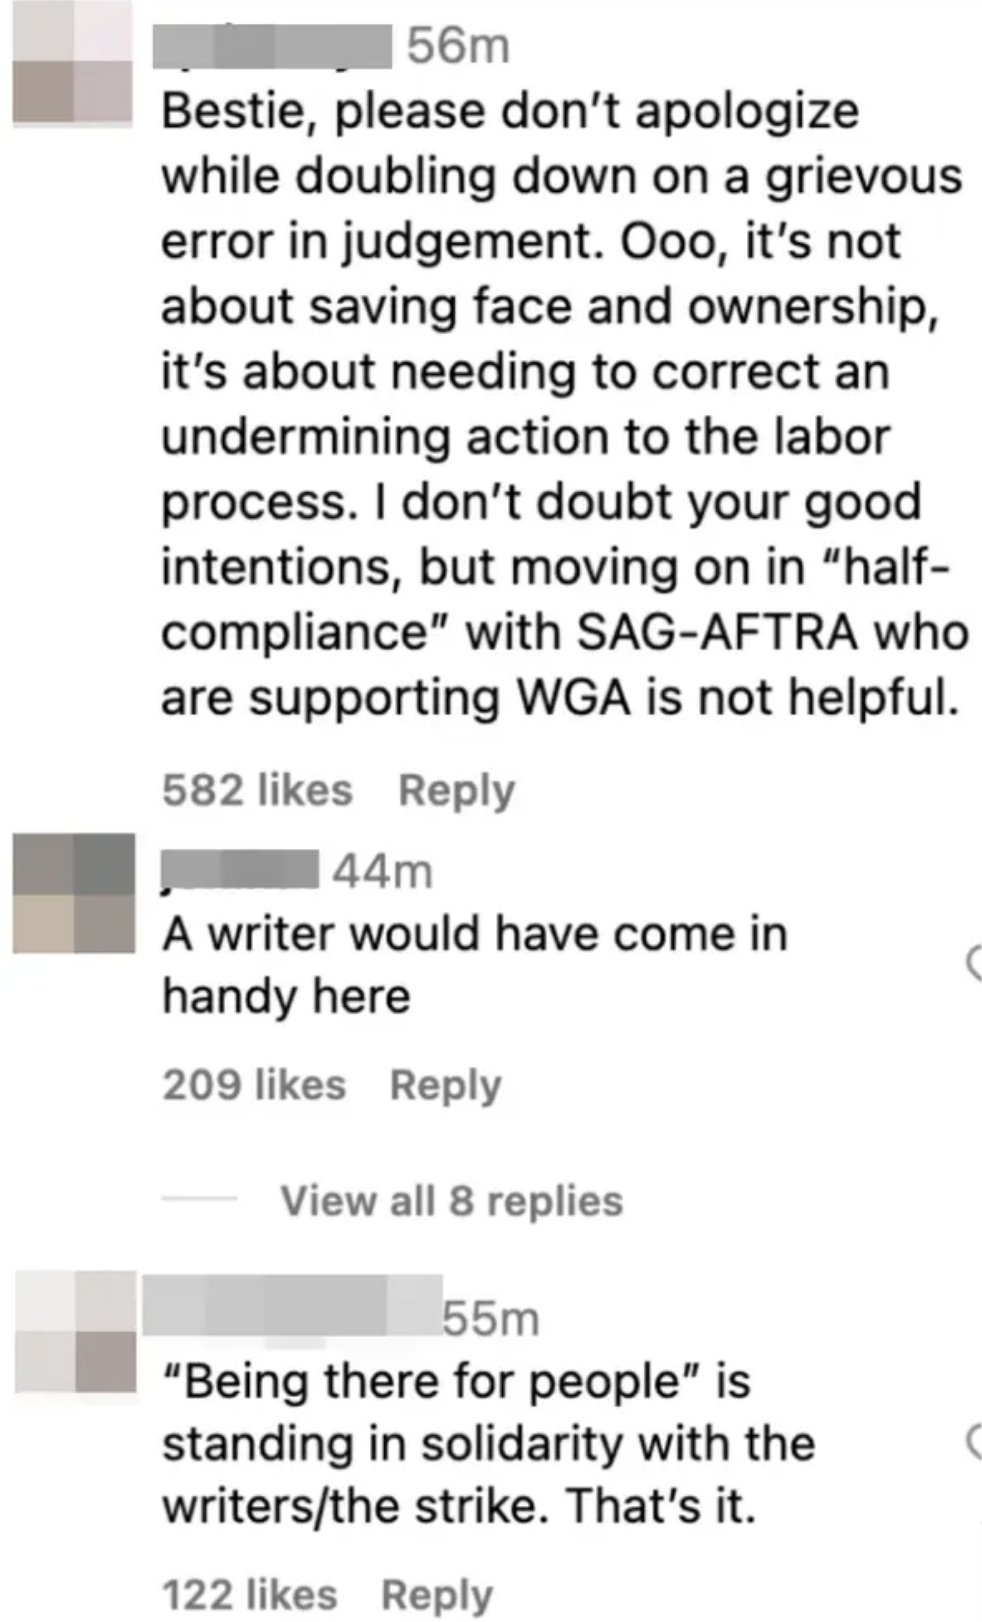 One person commented &quot;A writer would have come in handy here&quot;